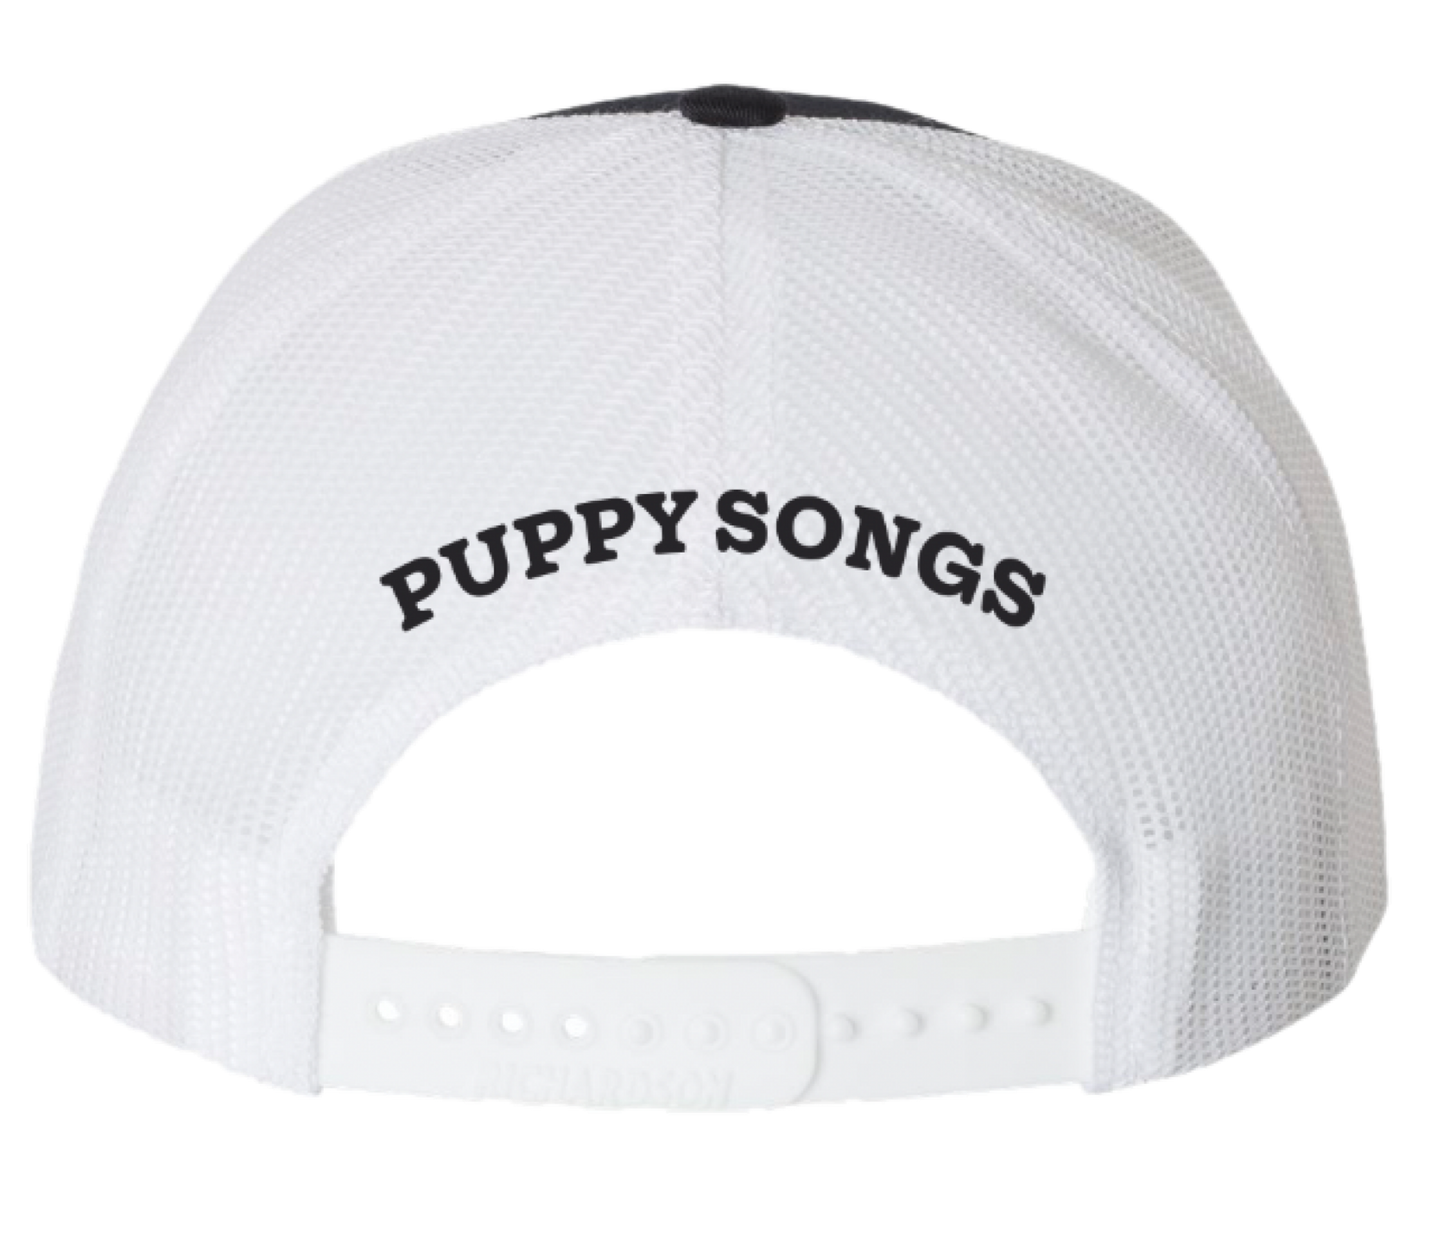 Puppy Songs Embroidered Hat